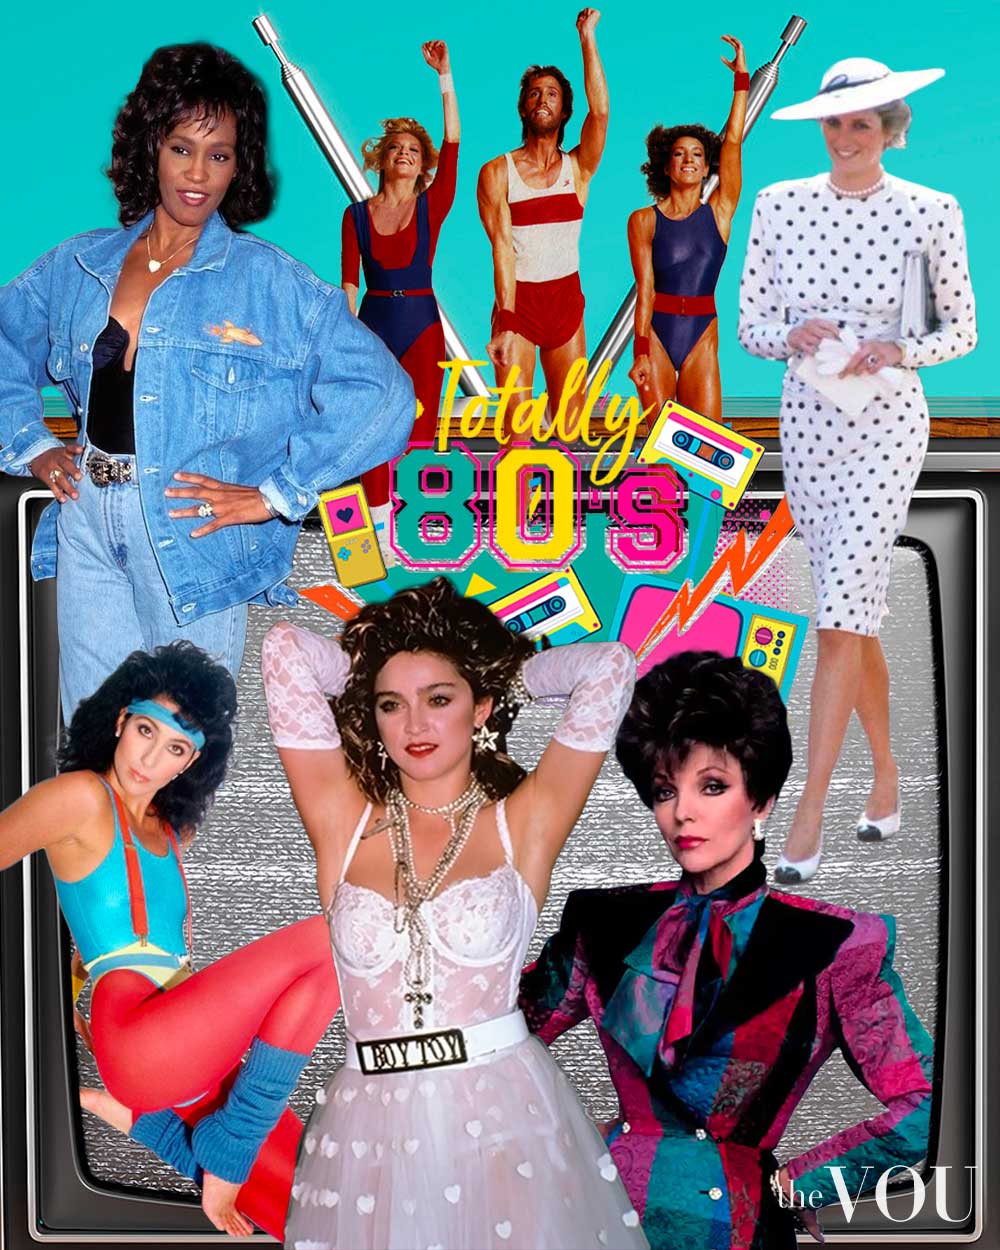 21 Iconic 80s Fashion Trends to Relive the 'Decade of Decadence